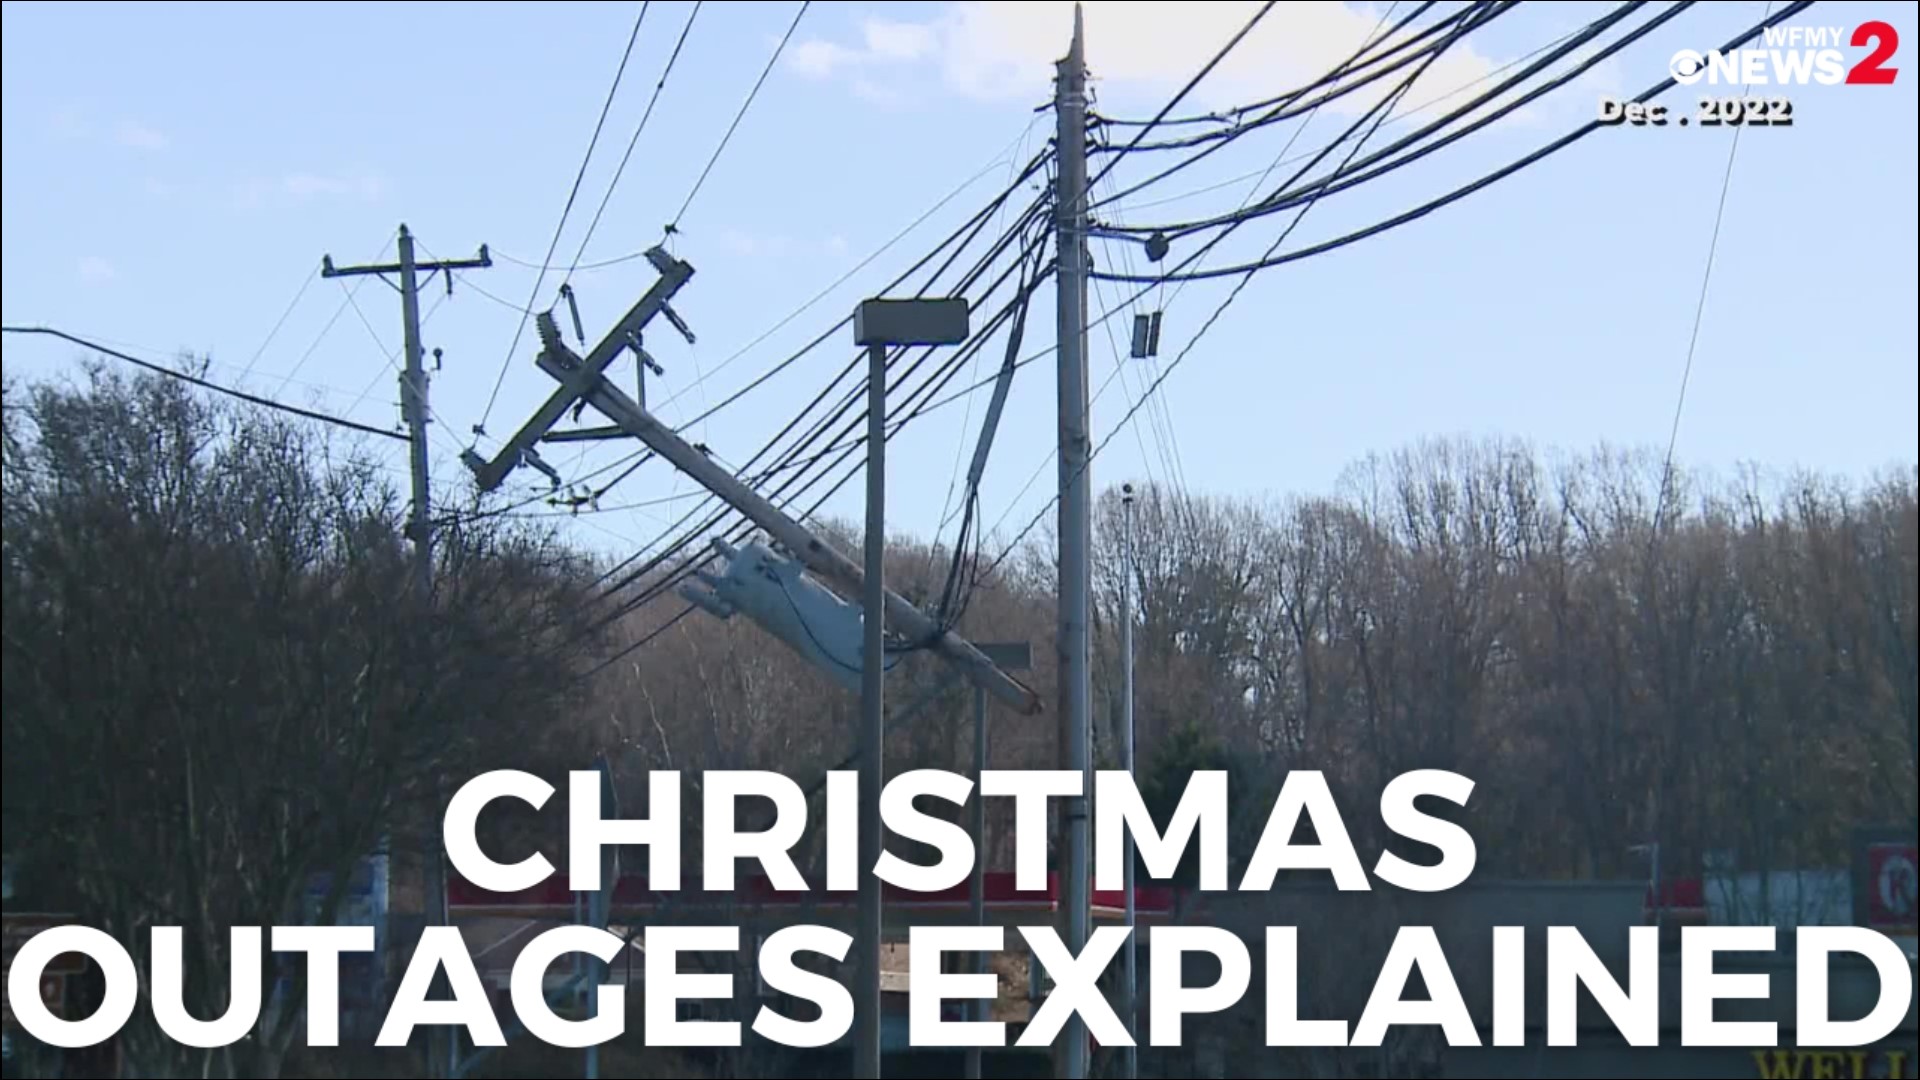 More than 500,000 people lost power on Christmas Eve after Duke Energy initiated rolling blackouts.